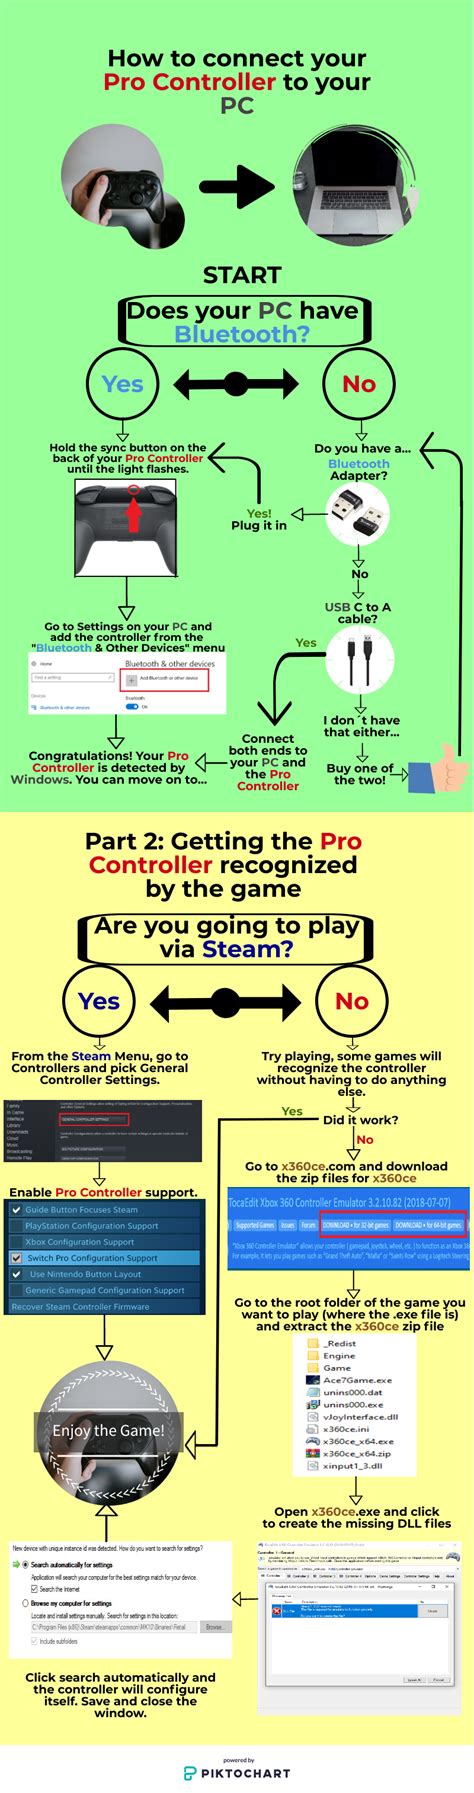 Then there's usually also a single usb cable that you can plug into the usb port on your computer. How to connect your Pro Controller to your PC (Infographic)